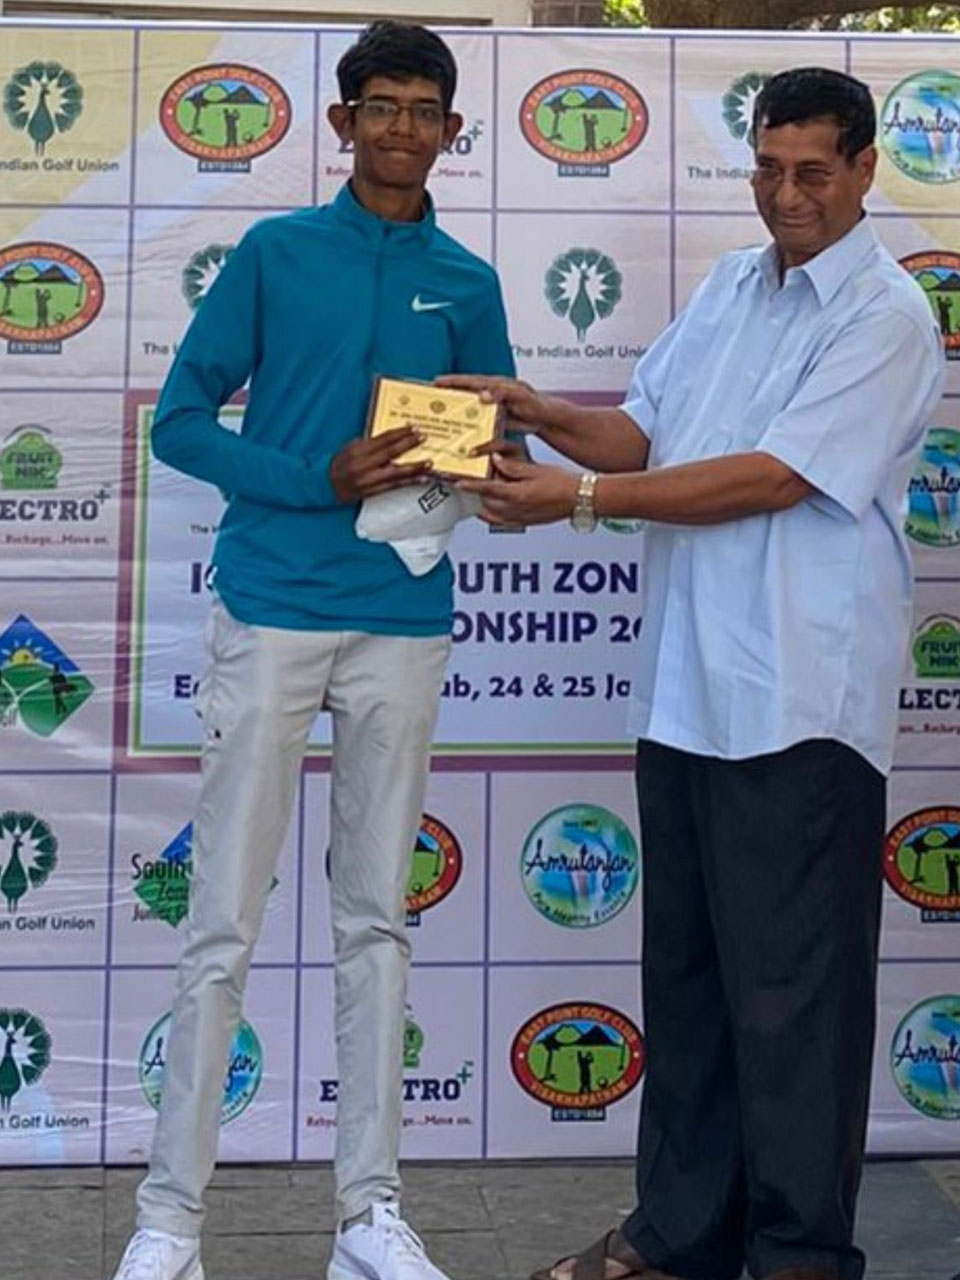 Sumith Chandra finishes 3rd at the SZ Amateur Championship